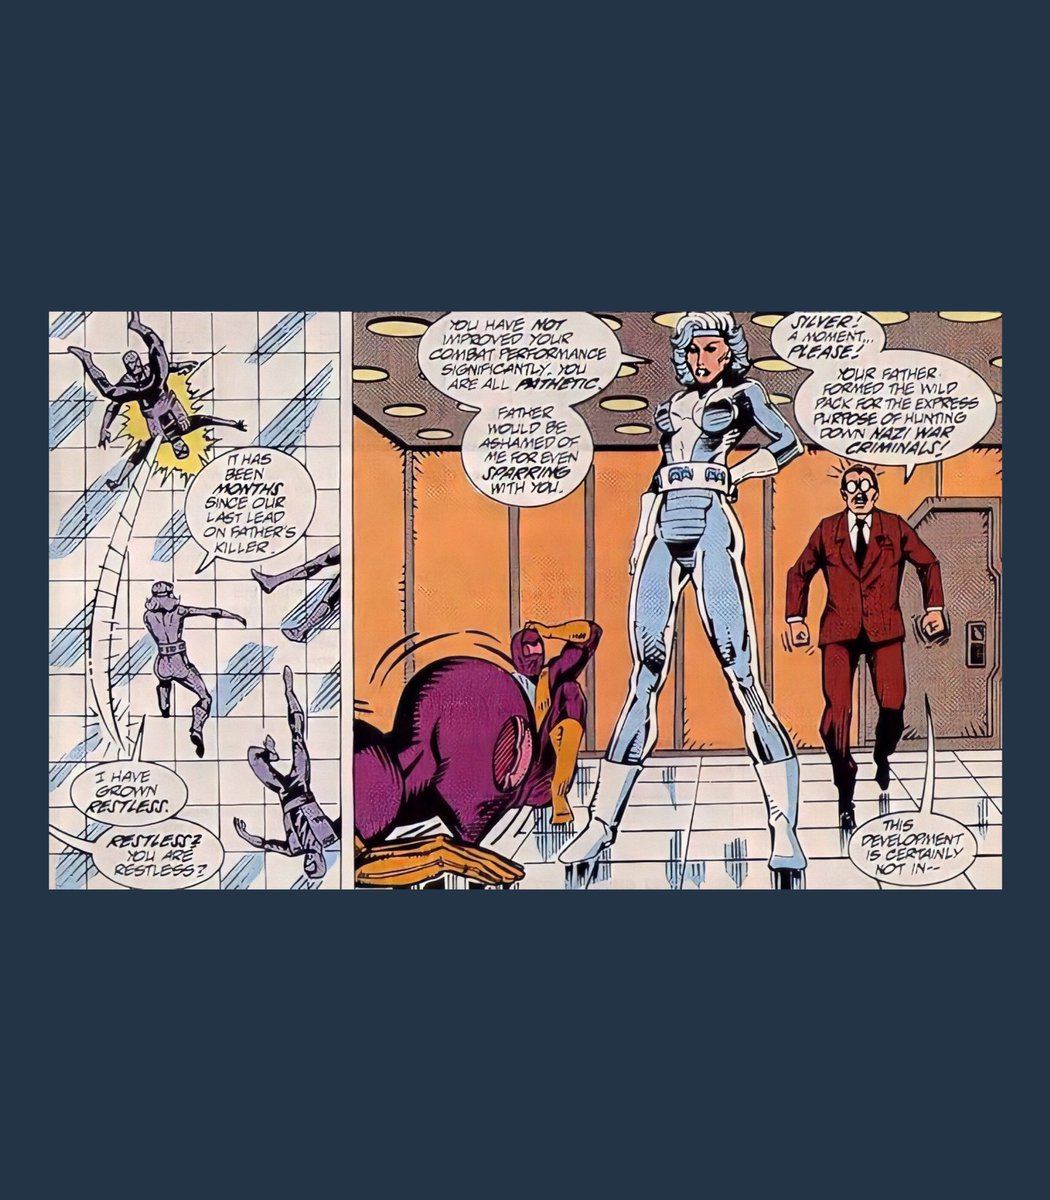 I don’t know how many times she wants to beat them up again and over again. - Silver Sable (1992) #14